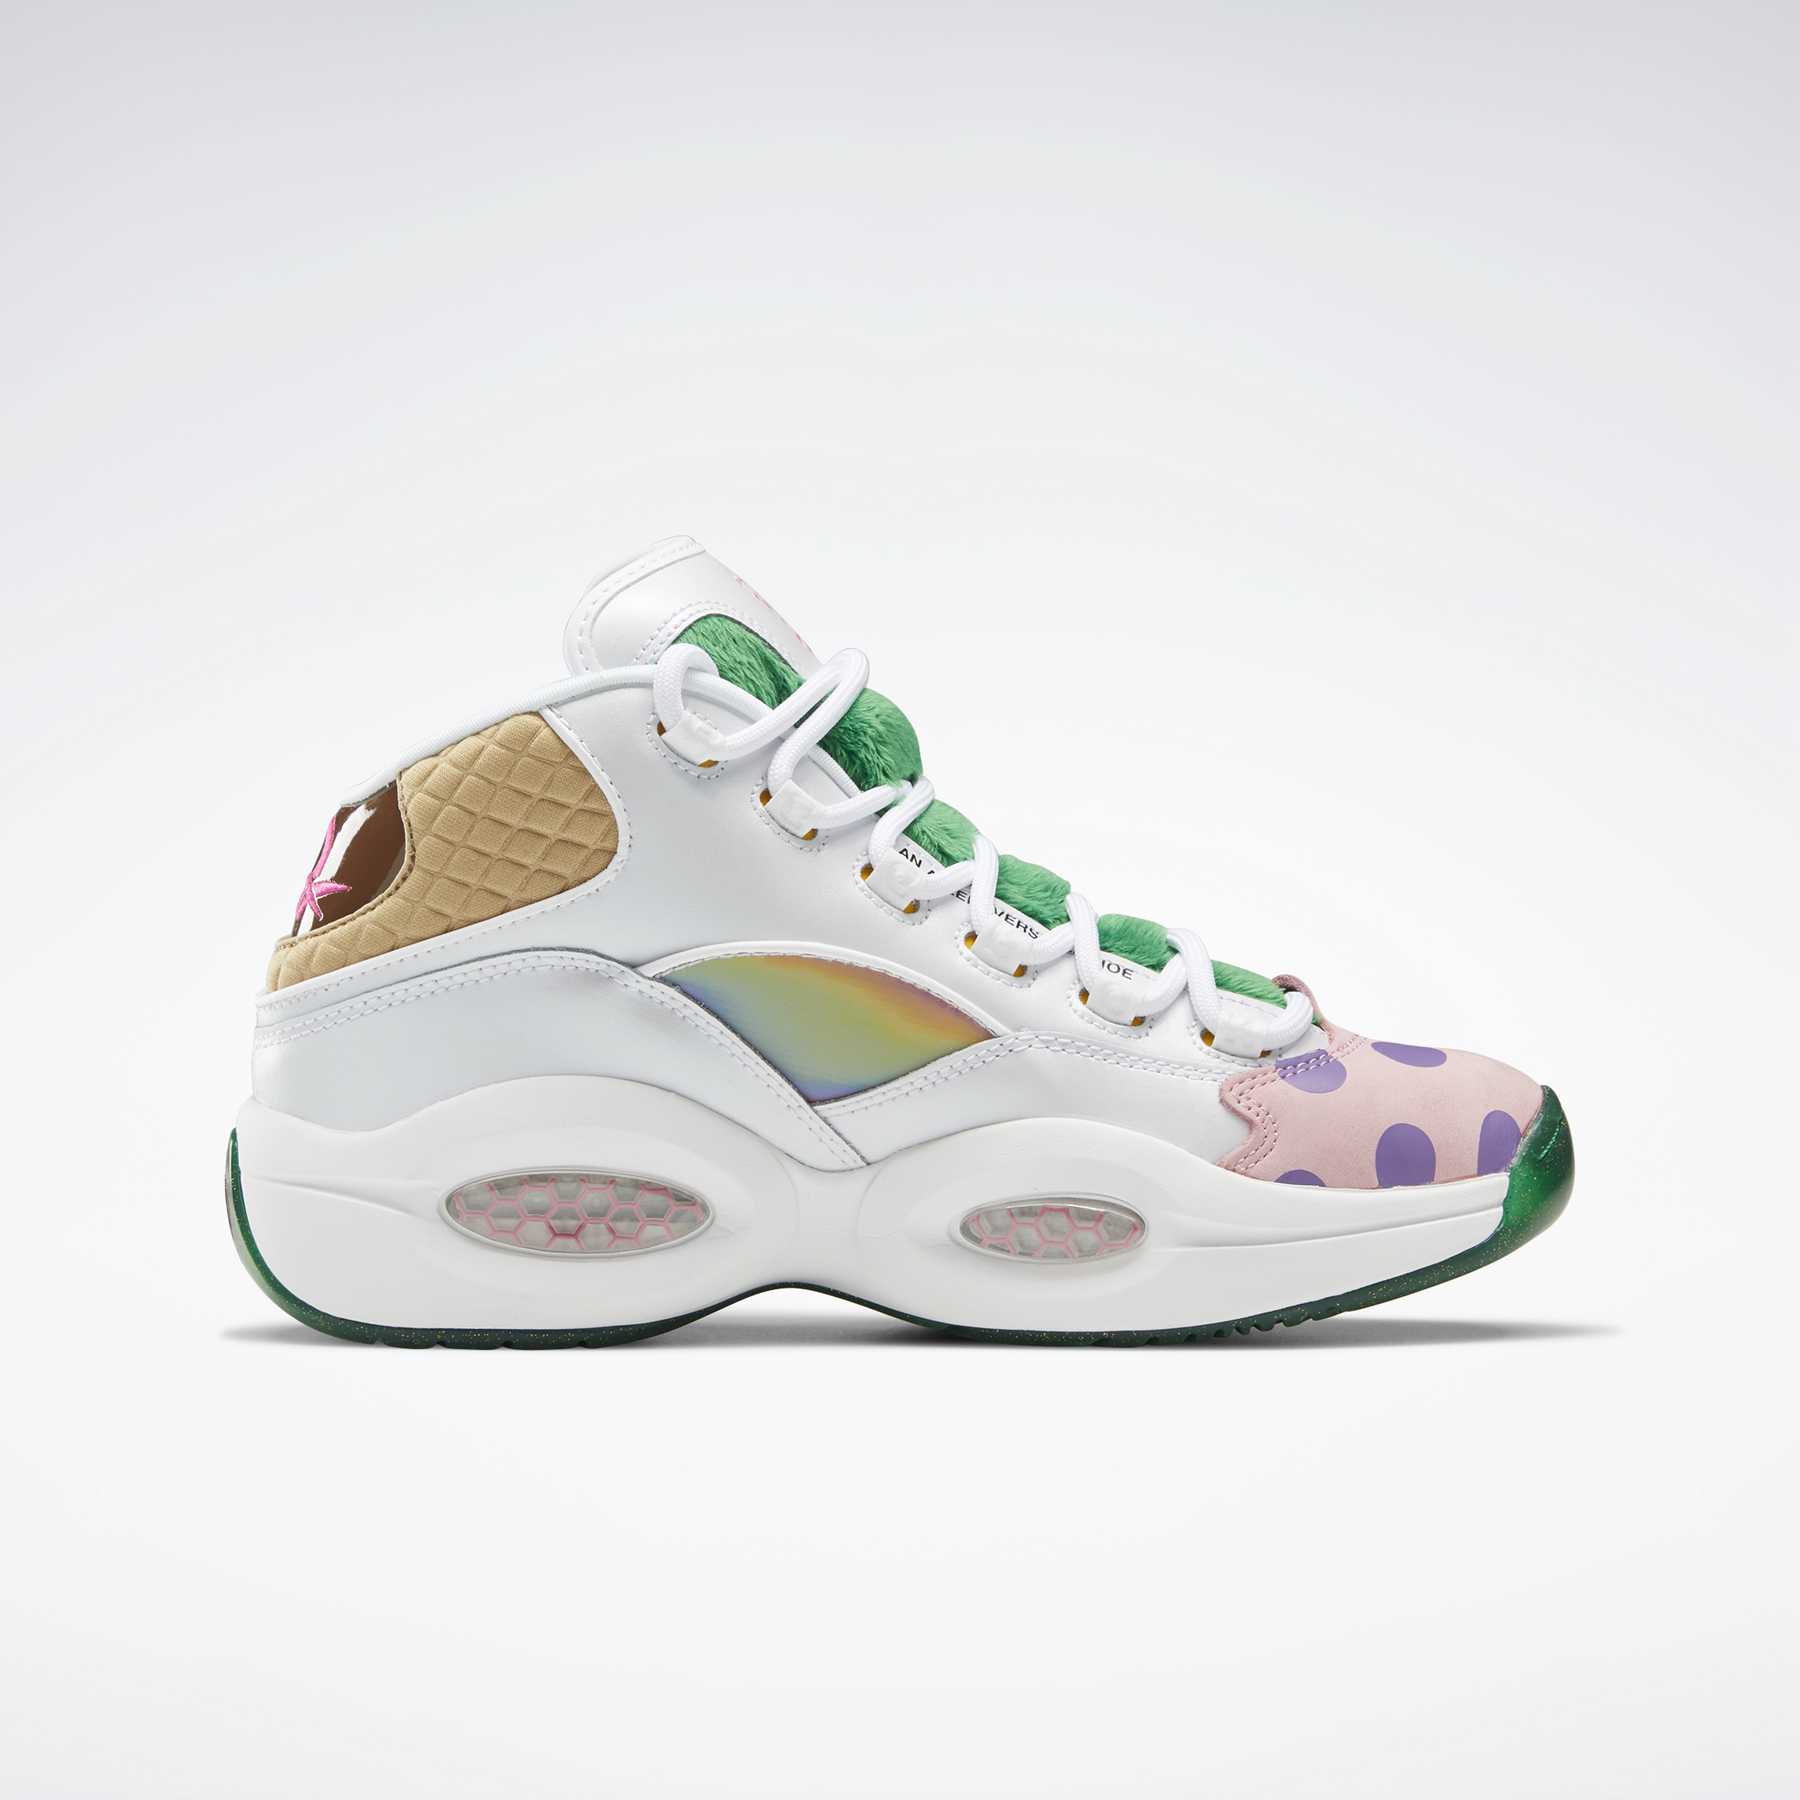 Reebok Candy Land Question Mid Men's Basketball Shoes